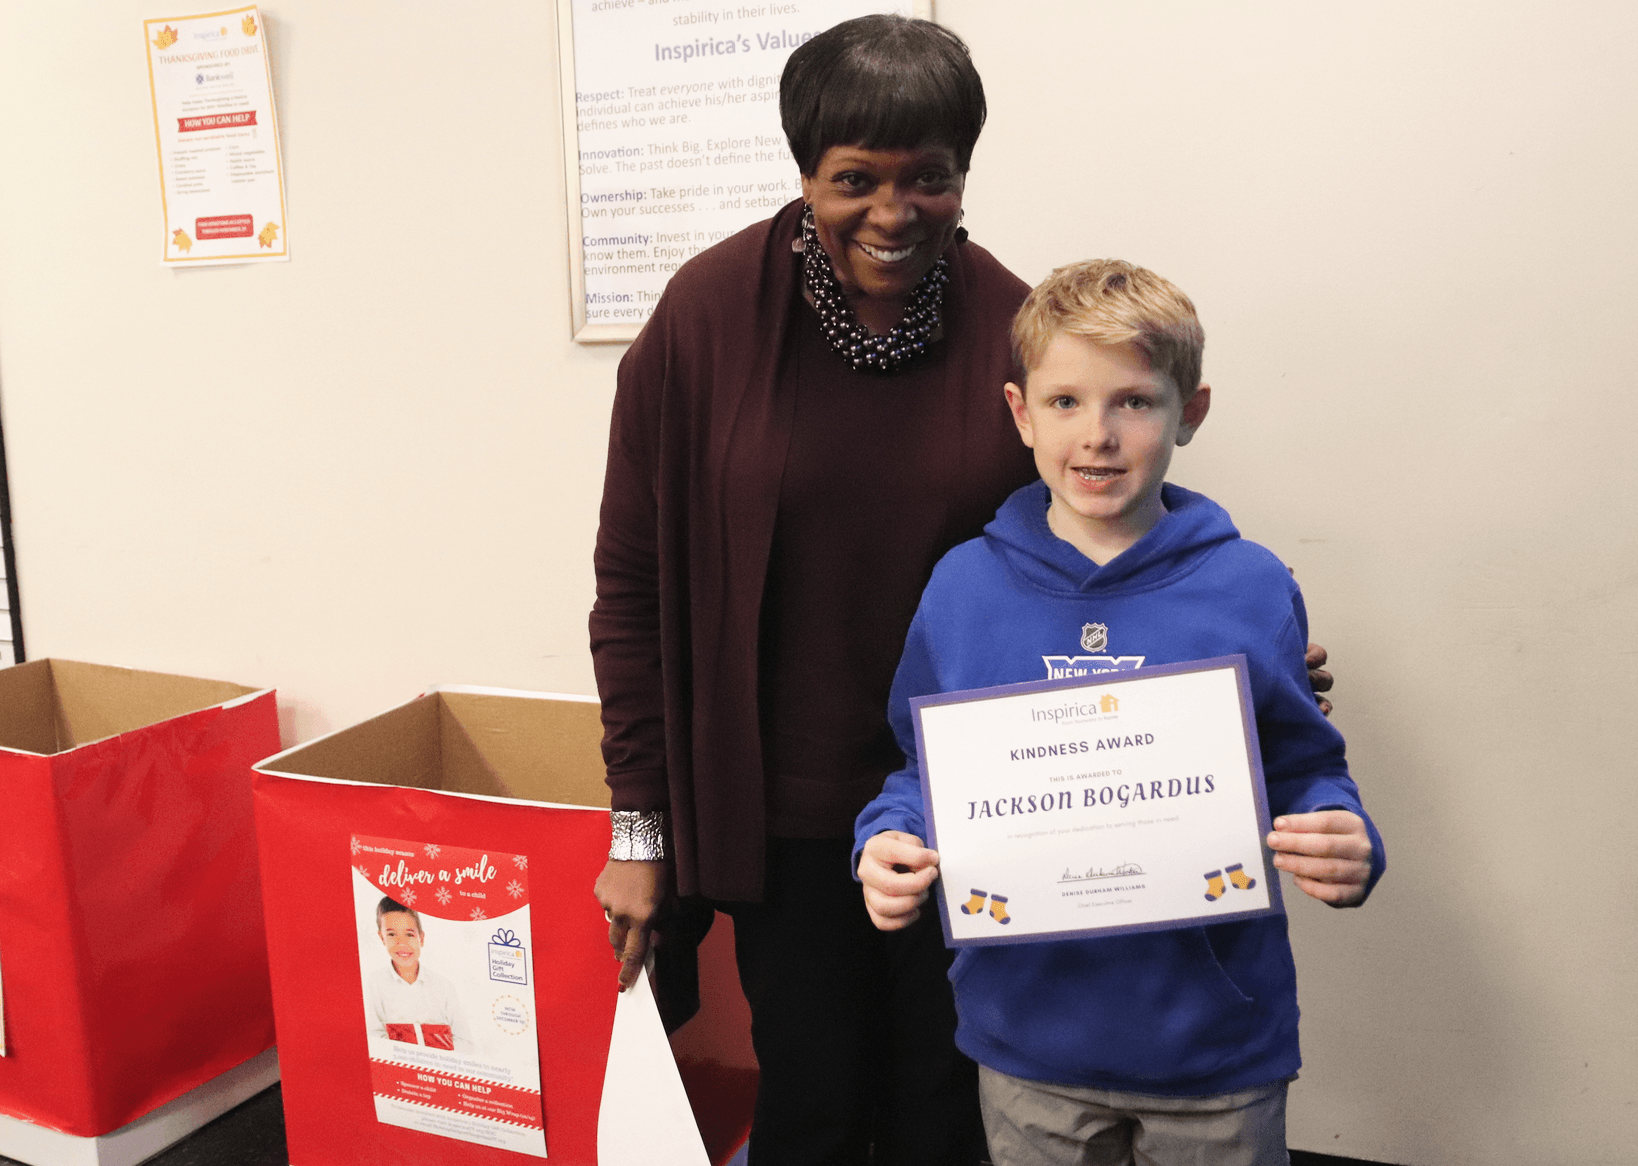 Jackson Bogardus was recently presented a Kindness Award by Inspirica CEO Denise Durham Williams in Stamford for his successful "Socktober" sock drive in Greenwich. Photo: Leslie Yager